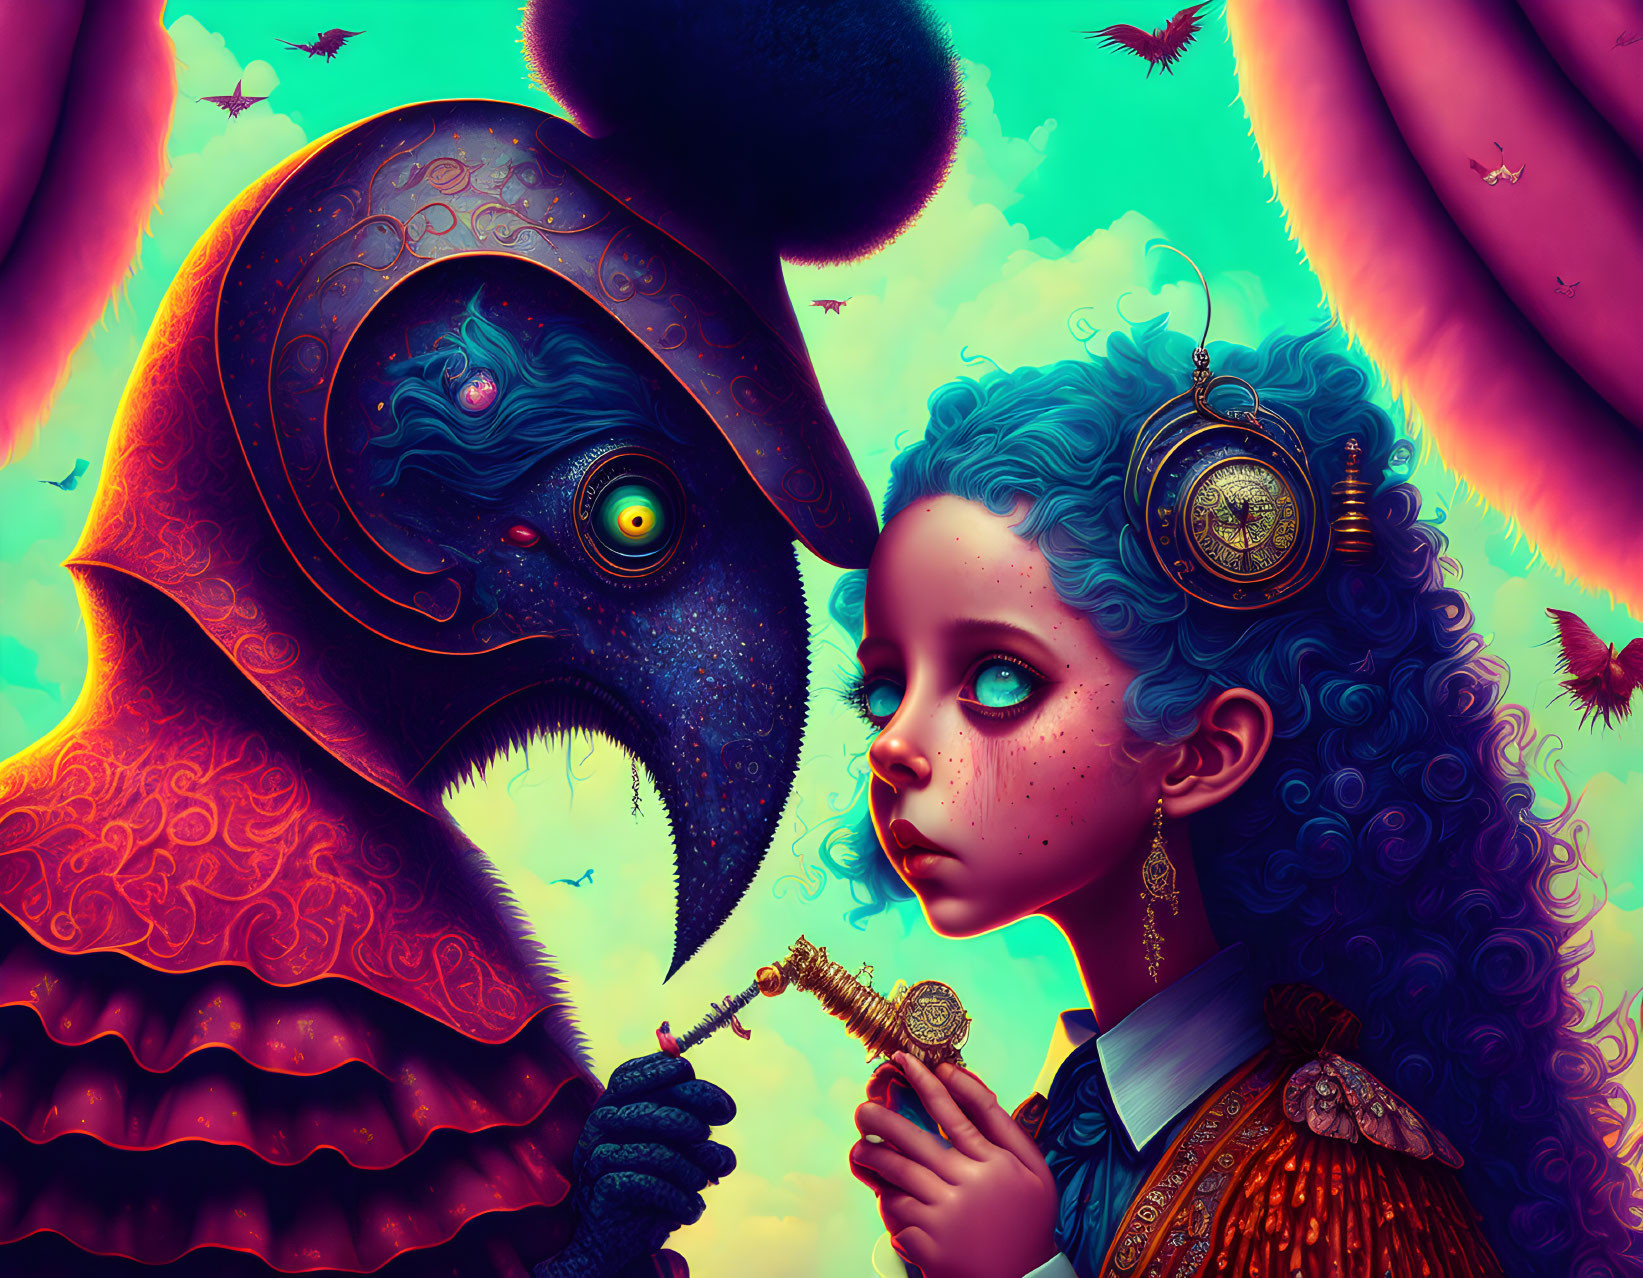 Alice And The Crow